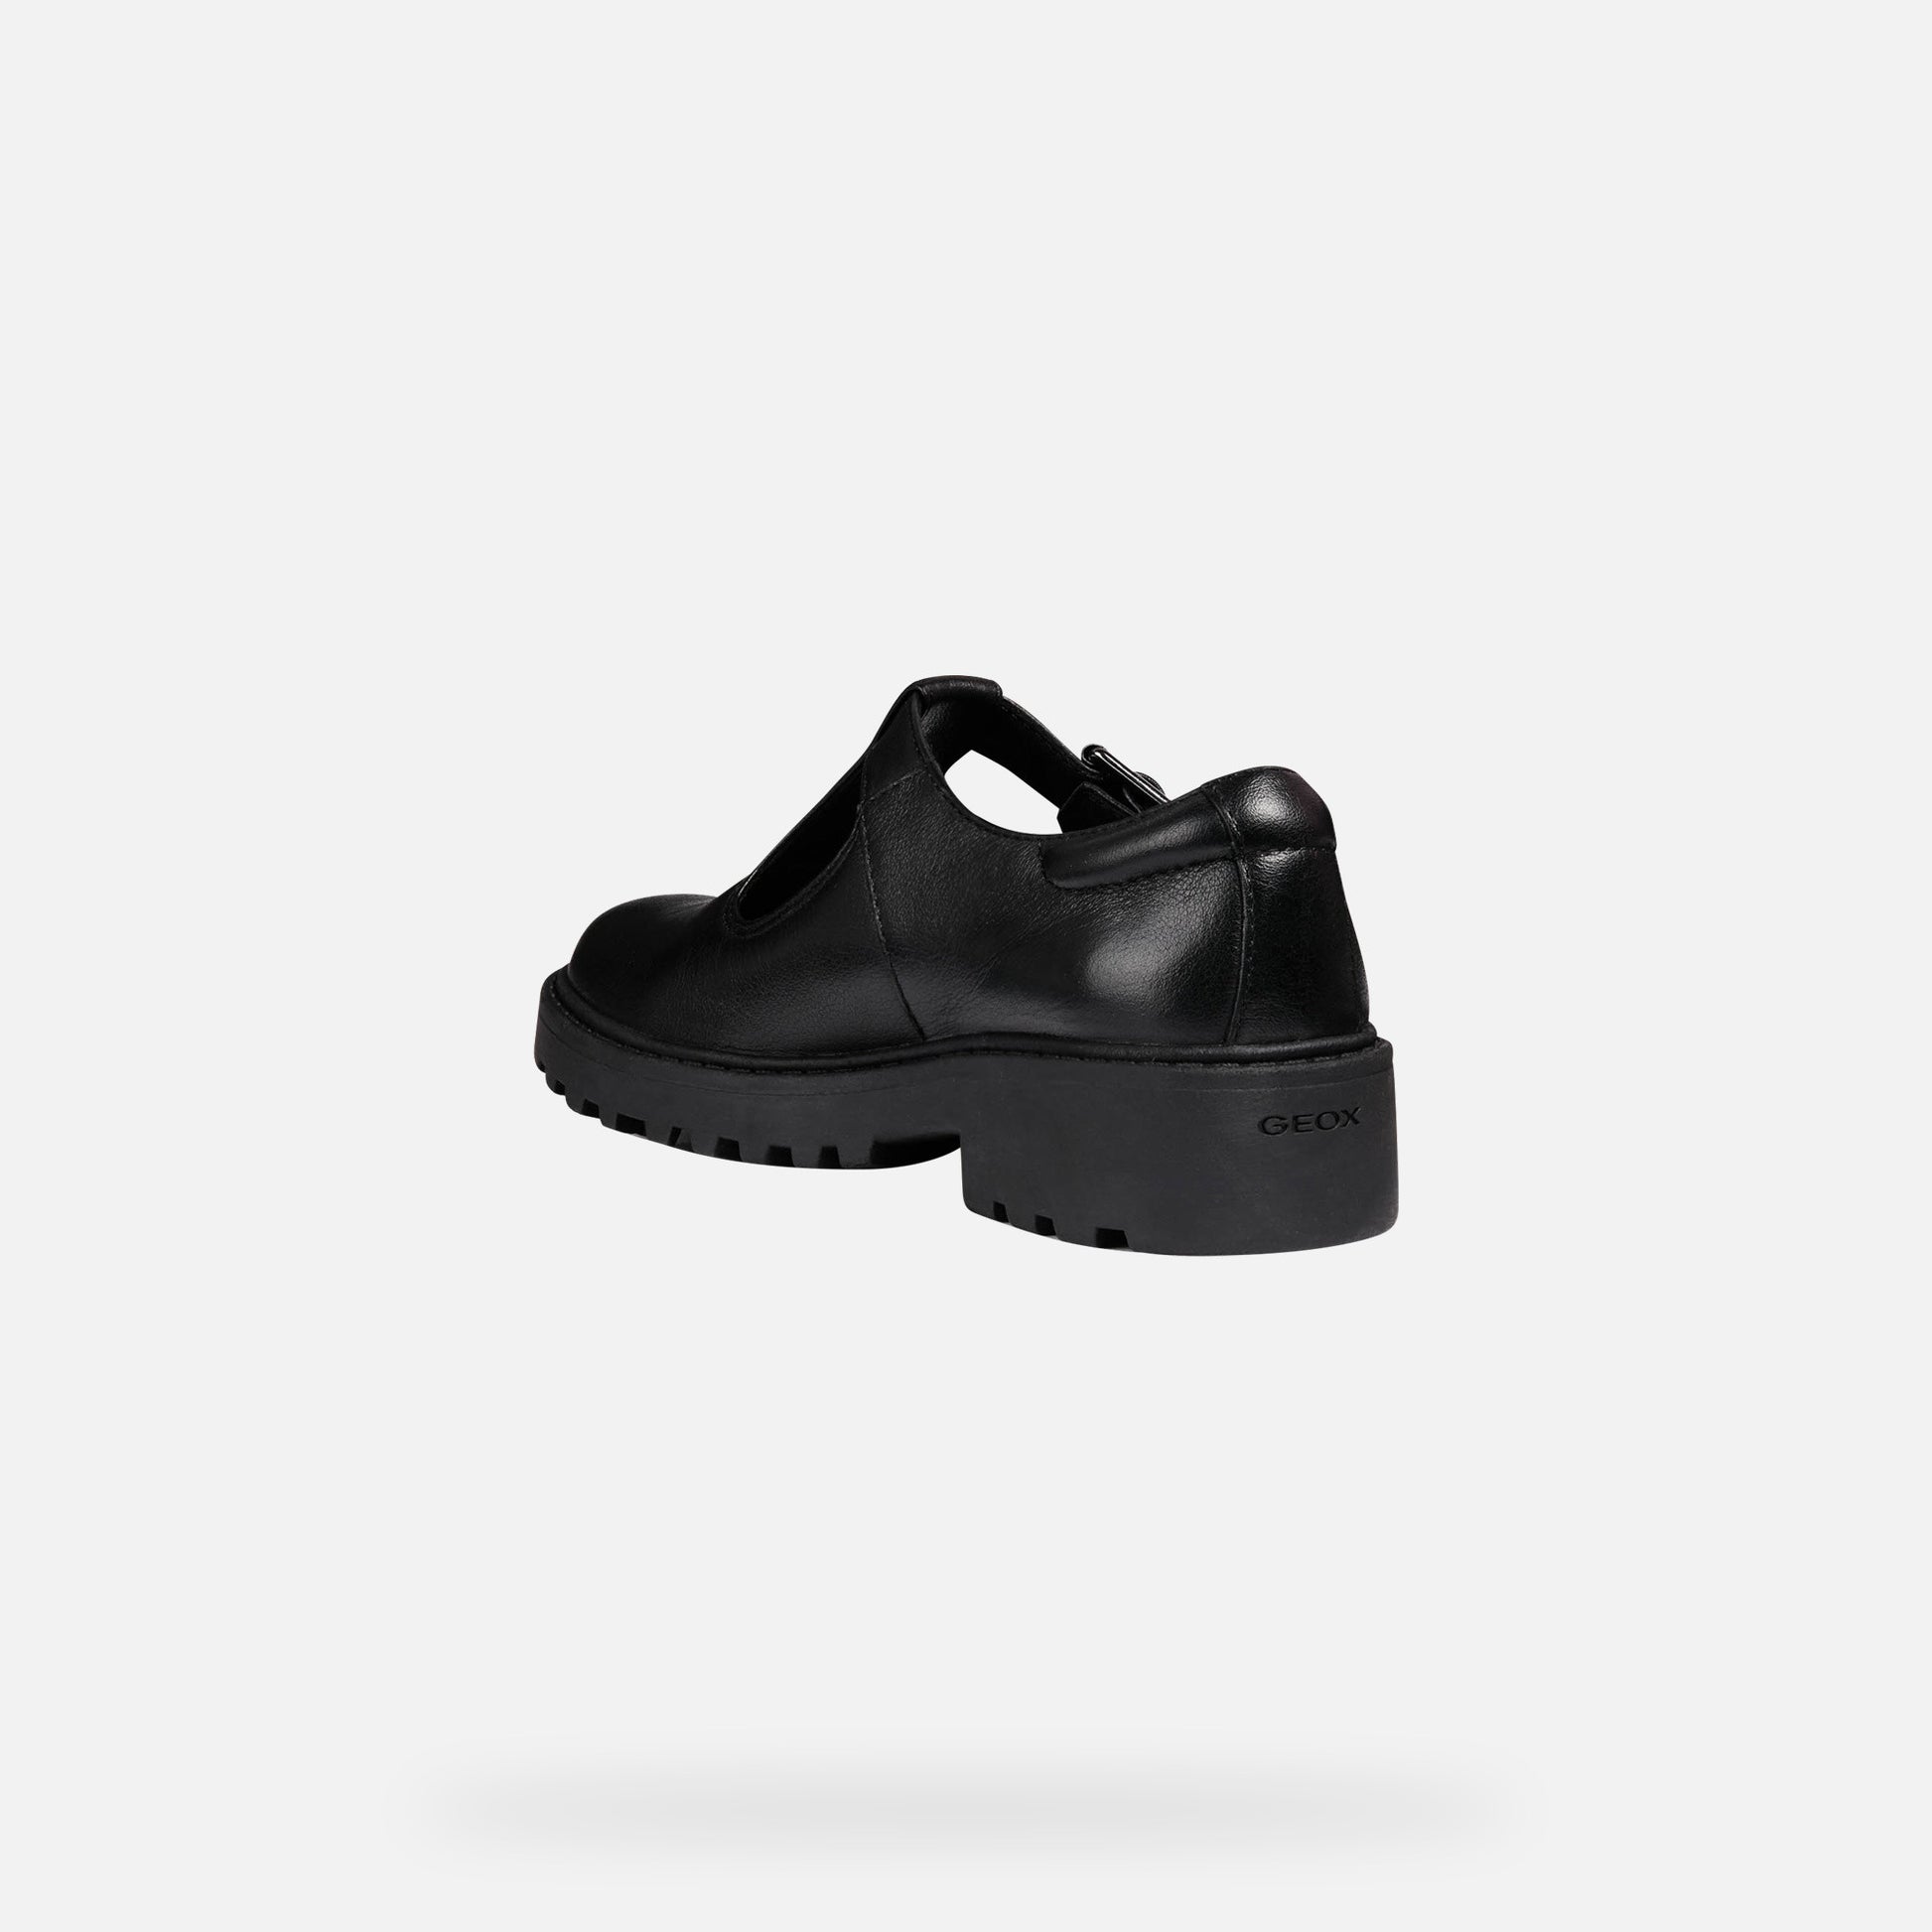 A girls Mary Jane school shoe by Geox, style casey, in black with buckle fastening. Inner side view.